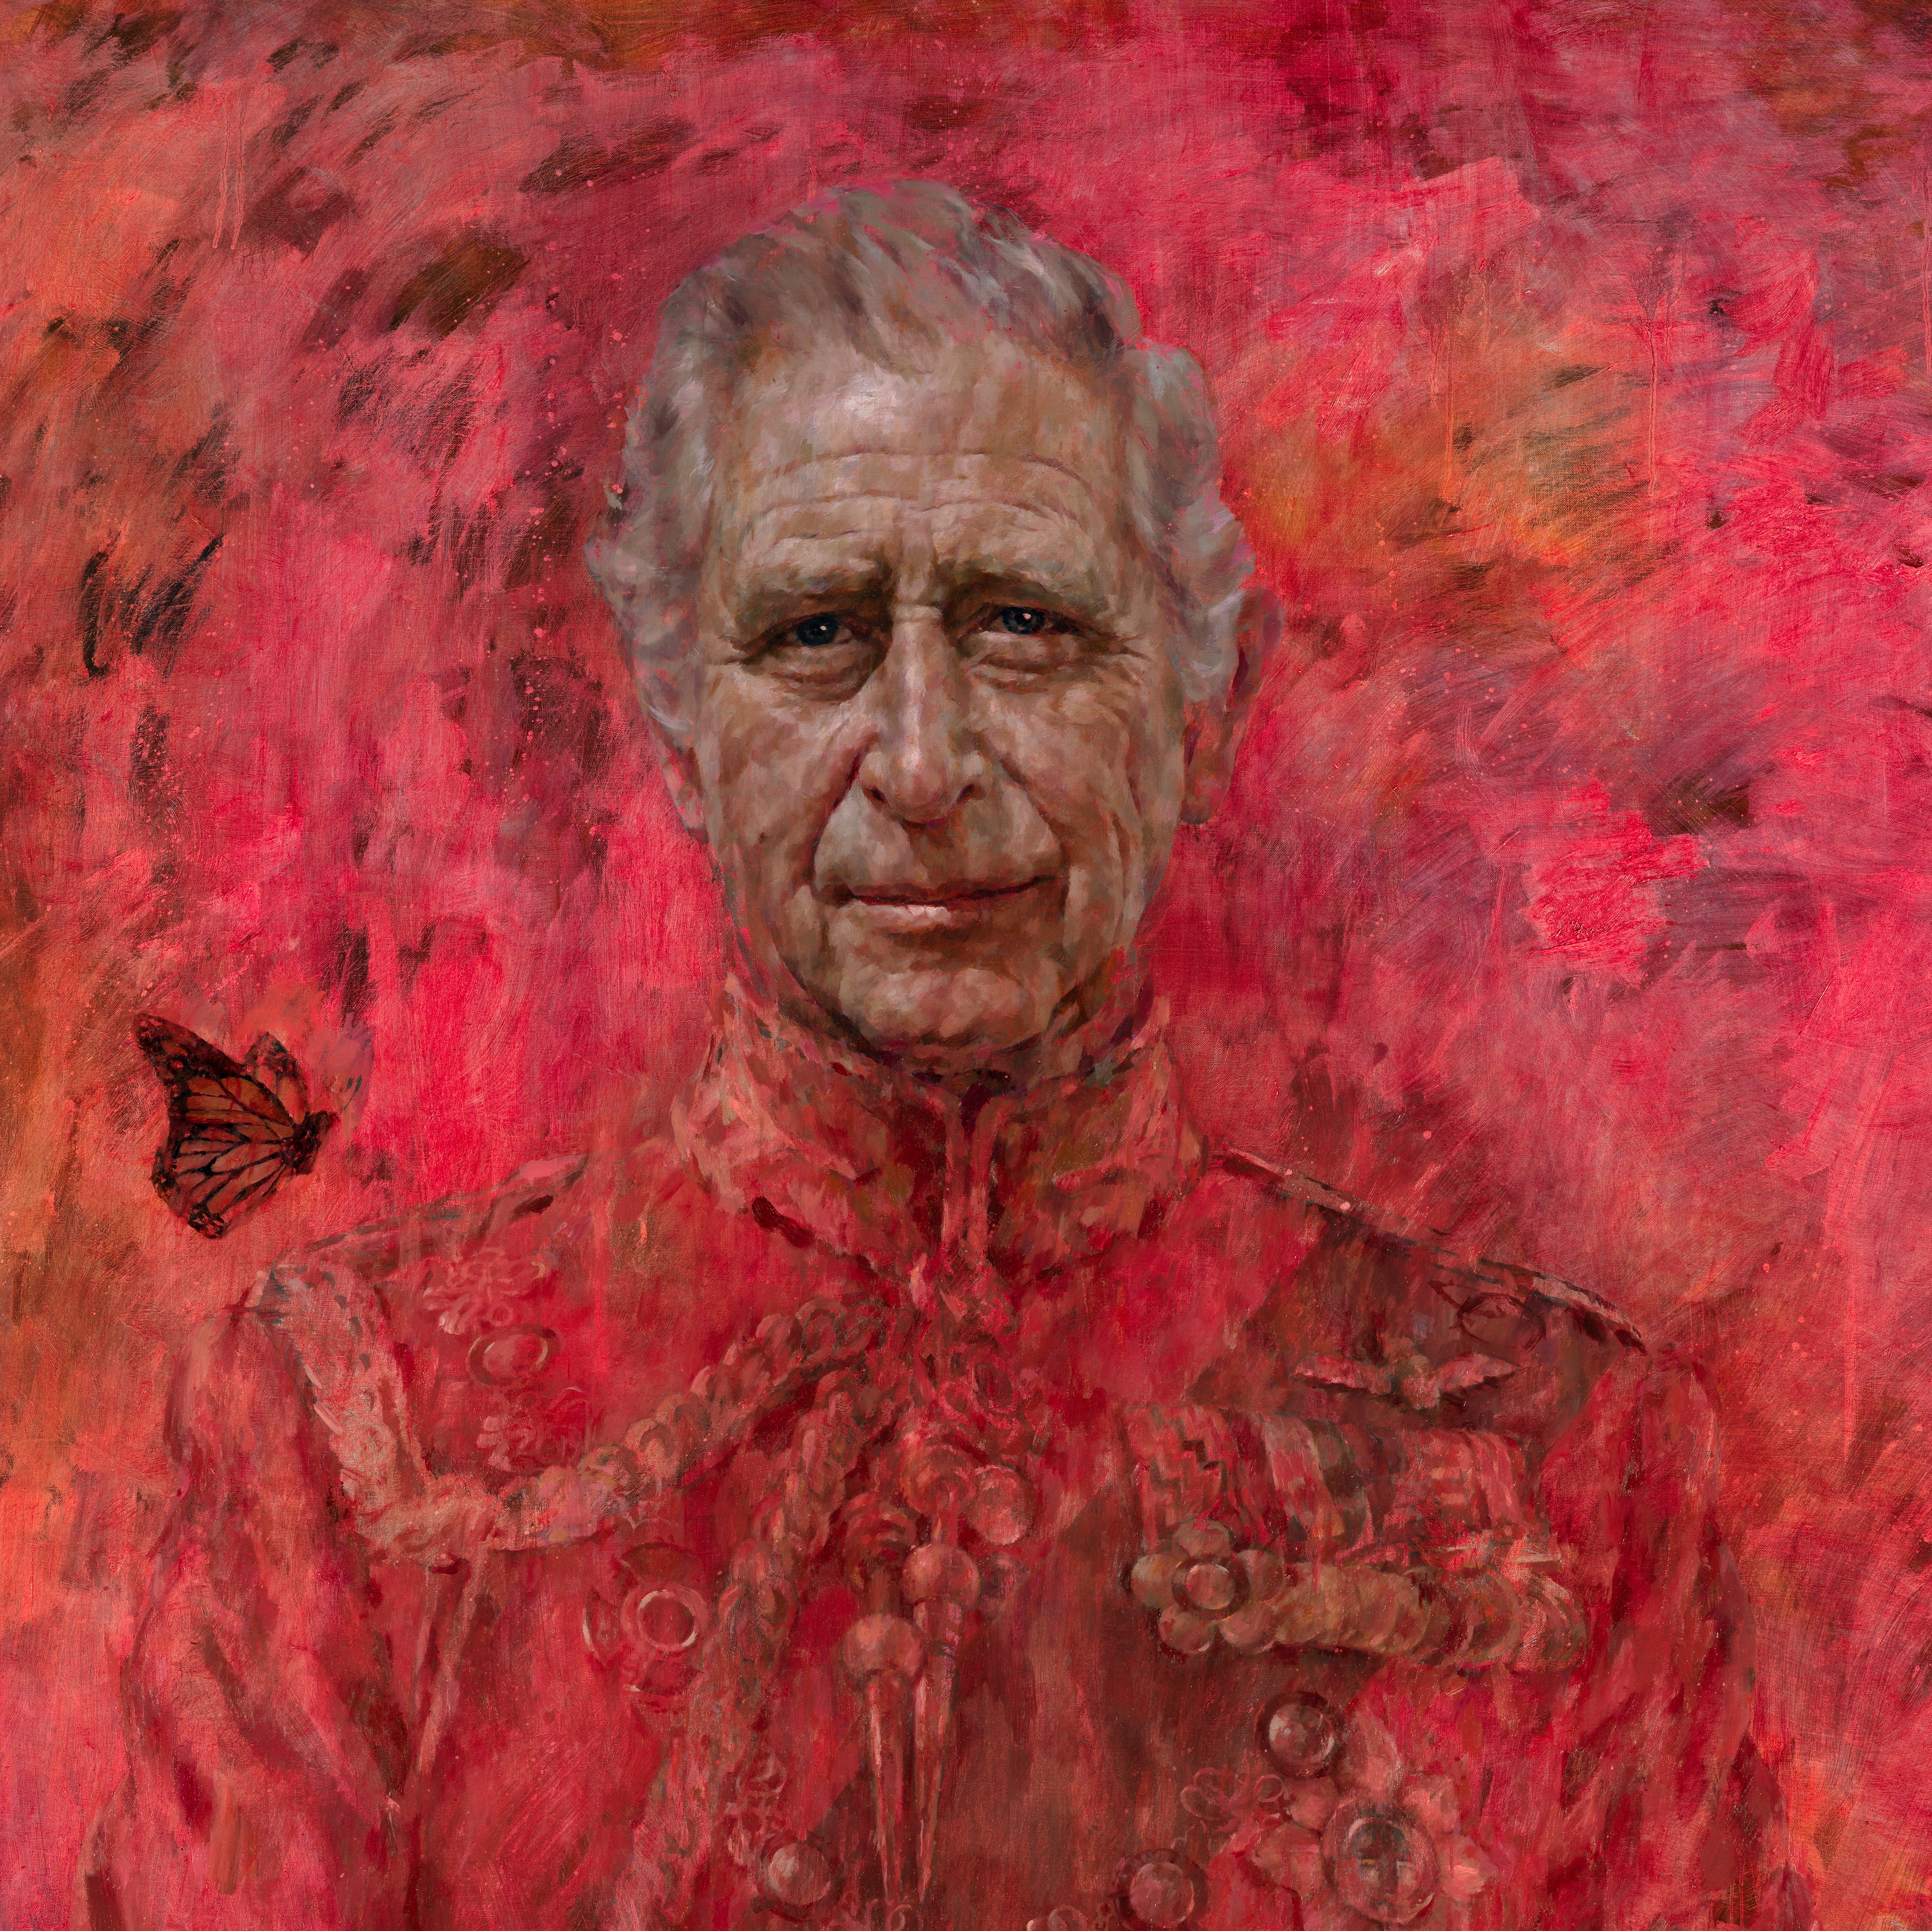 Portrait of Britain's King Charles by artist Jonathan Yeo